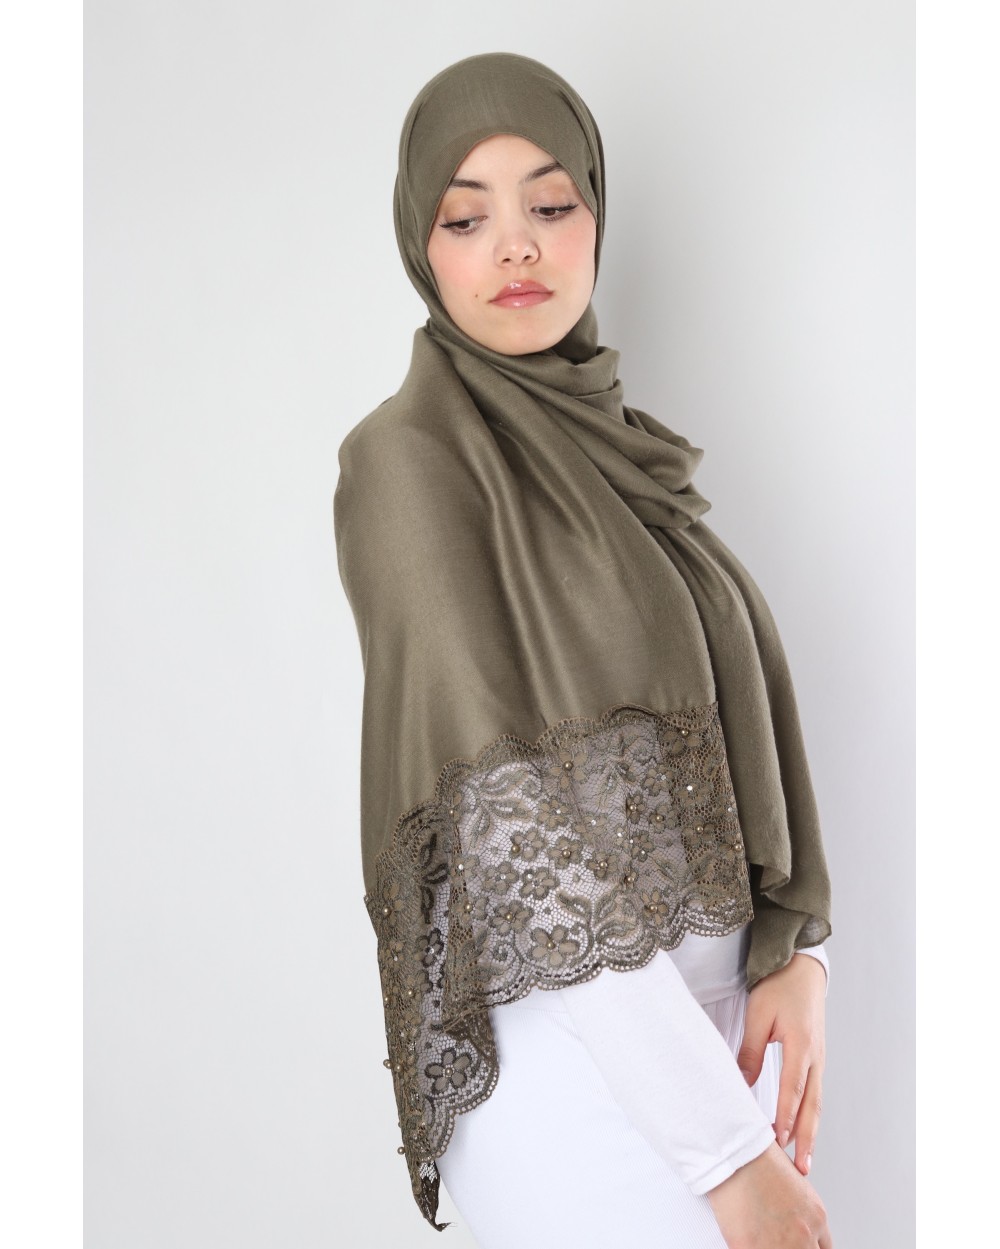 Maxi Hijab Winter Lace and Pearls